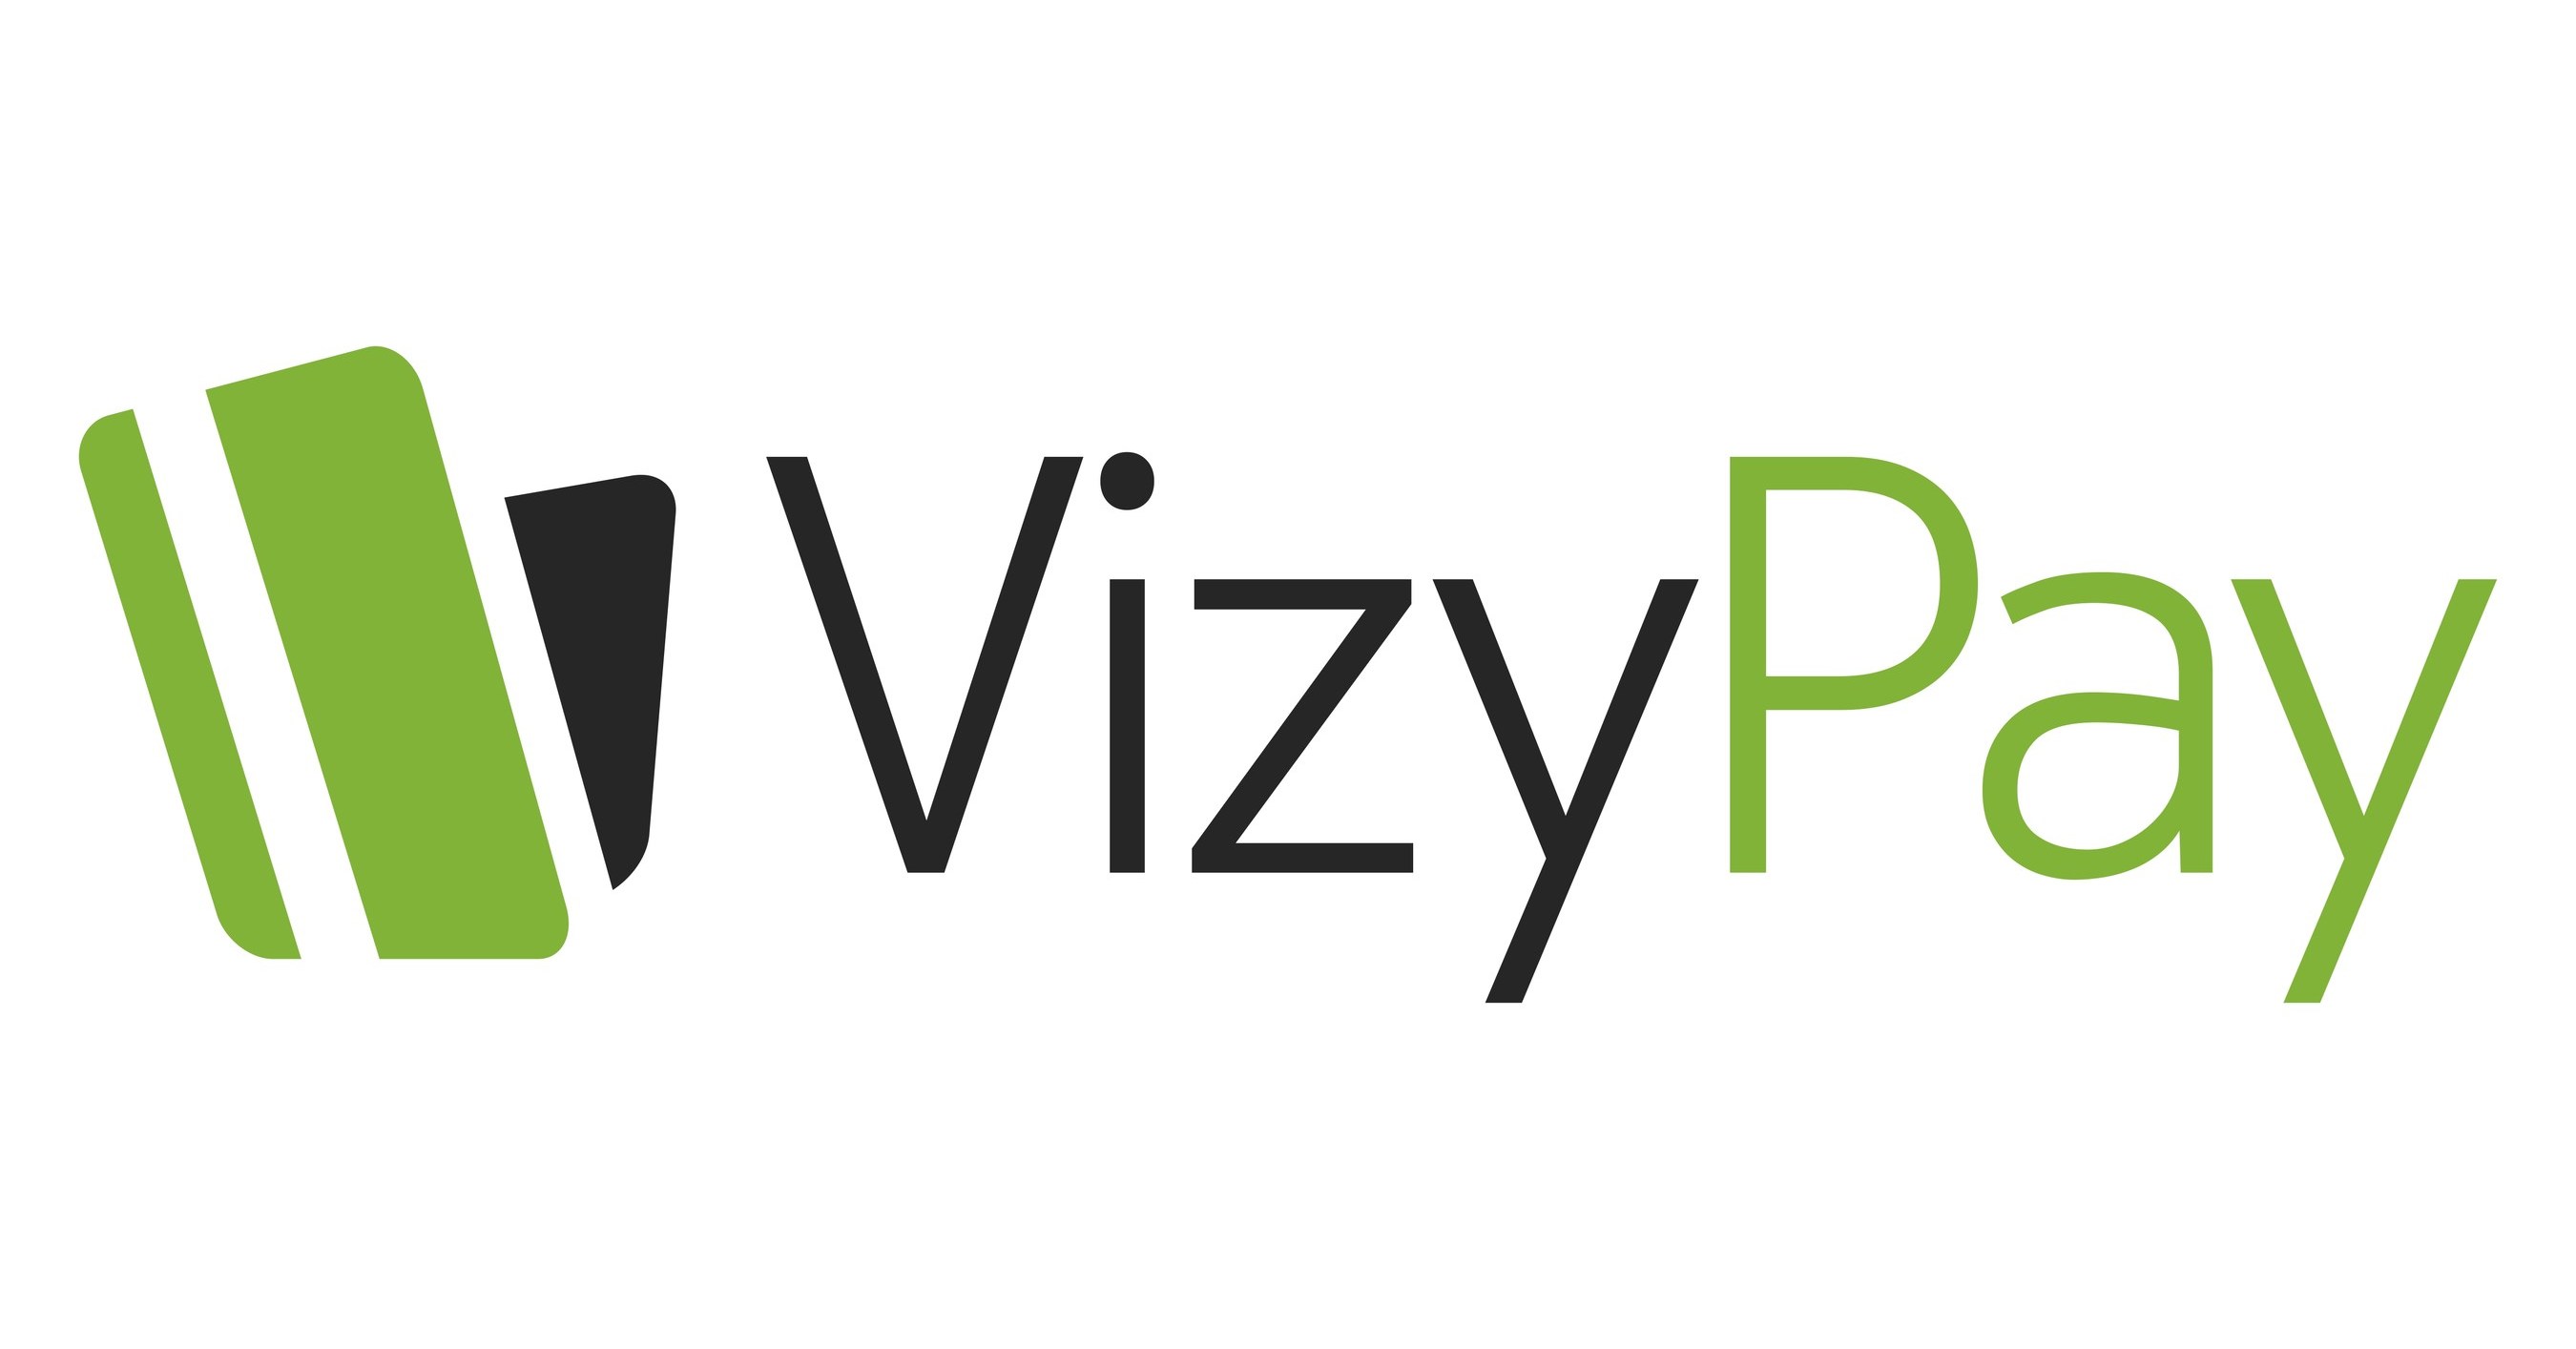 Leading Payment Processor VizyPay Hires Director of Business Development to Oversee and Expand Industry Partnerships